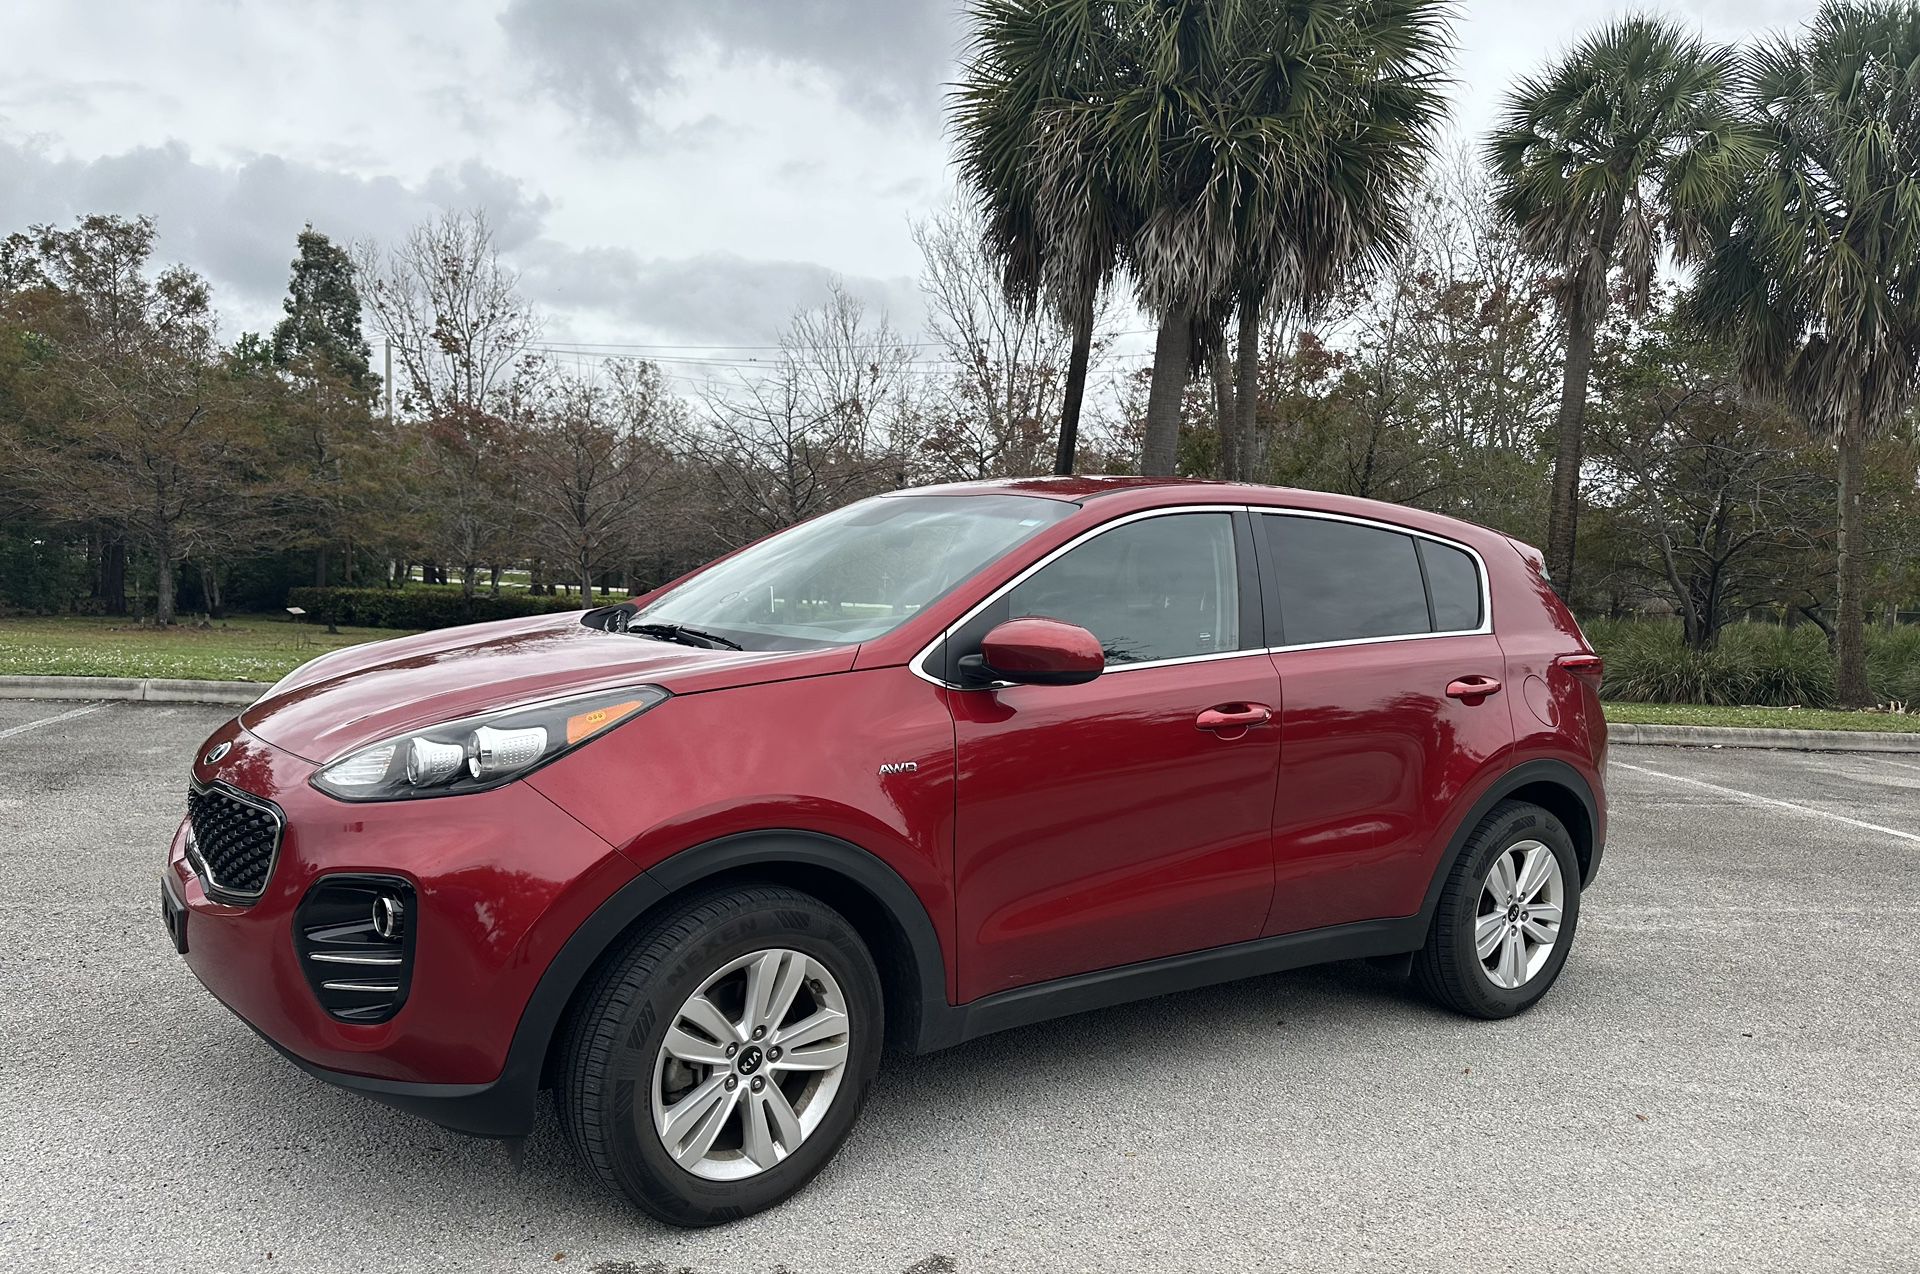 Kia Sportage! Need A Car? I Don’t Care About The Credit! Contact Me Asap!!